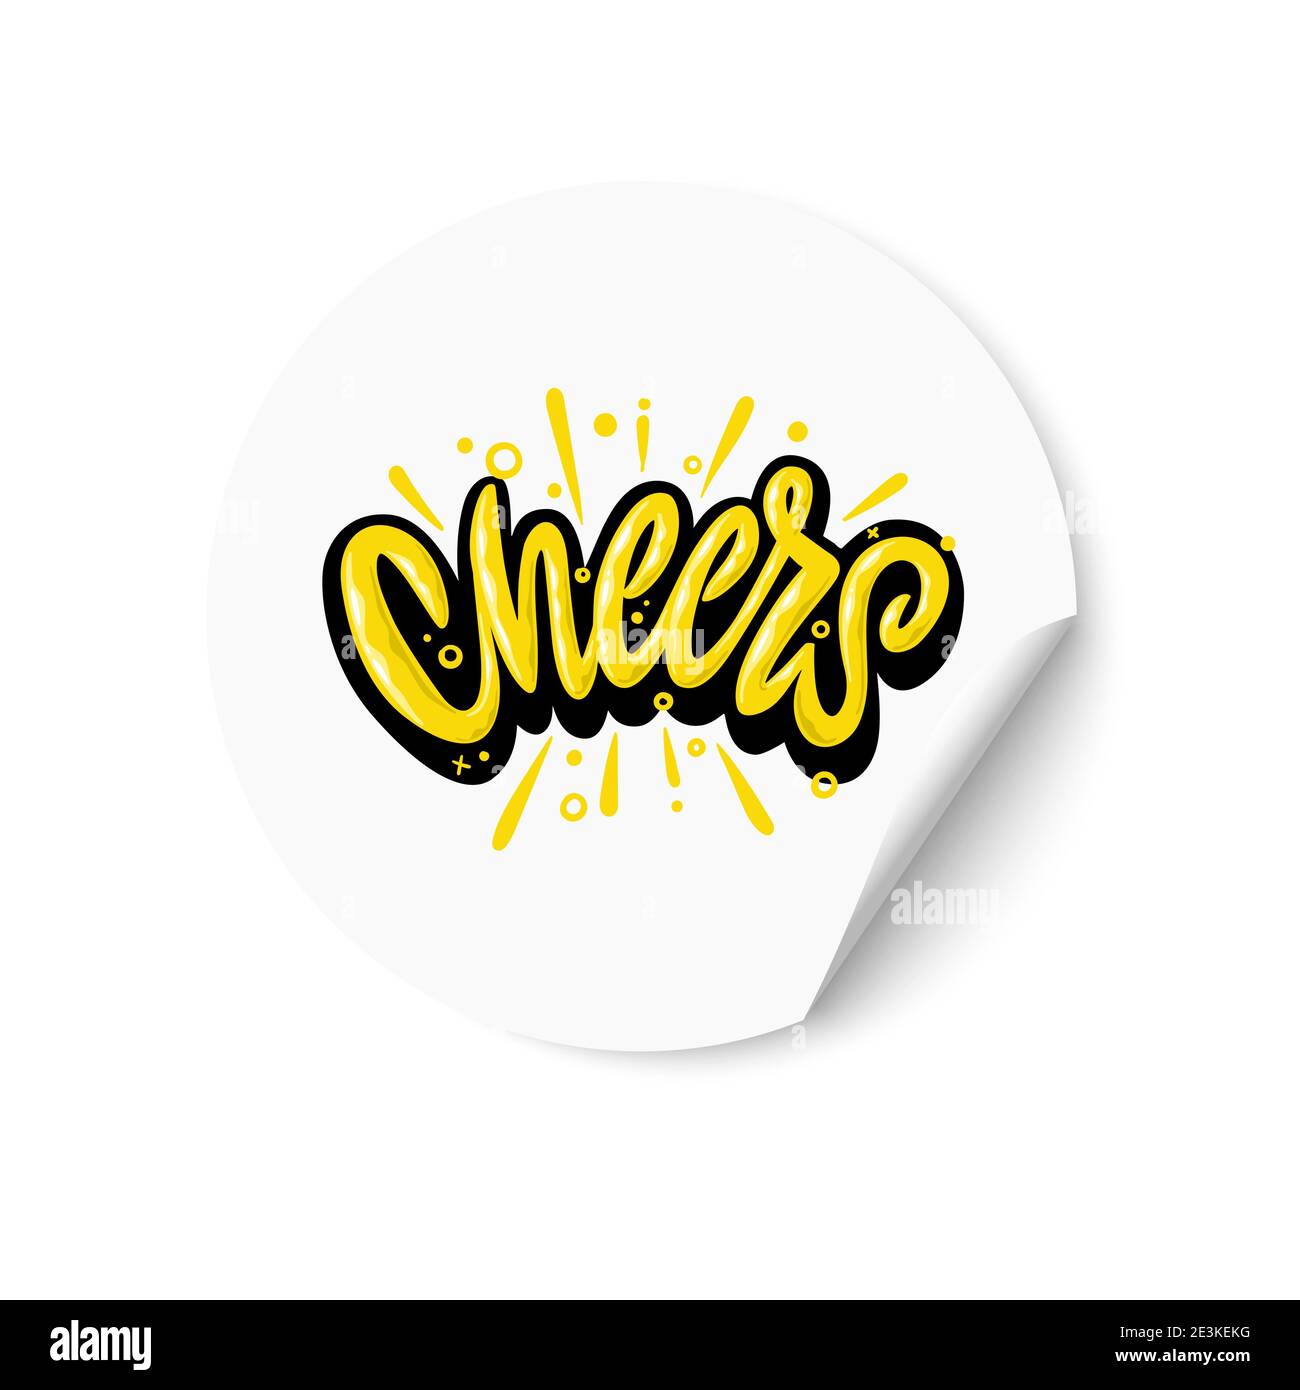 Cheers. White sticker with Cheers text. Hand lettering. Design for greeting cards, invitations, banners, gifts, prints and posters. Stock Vector